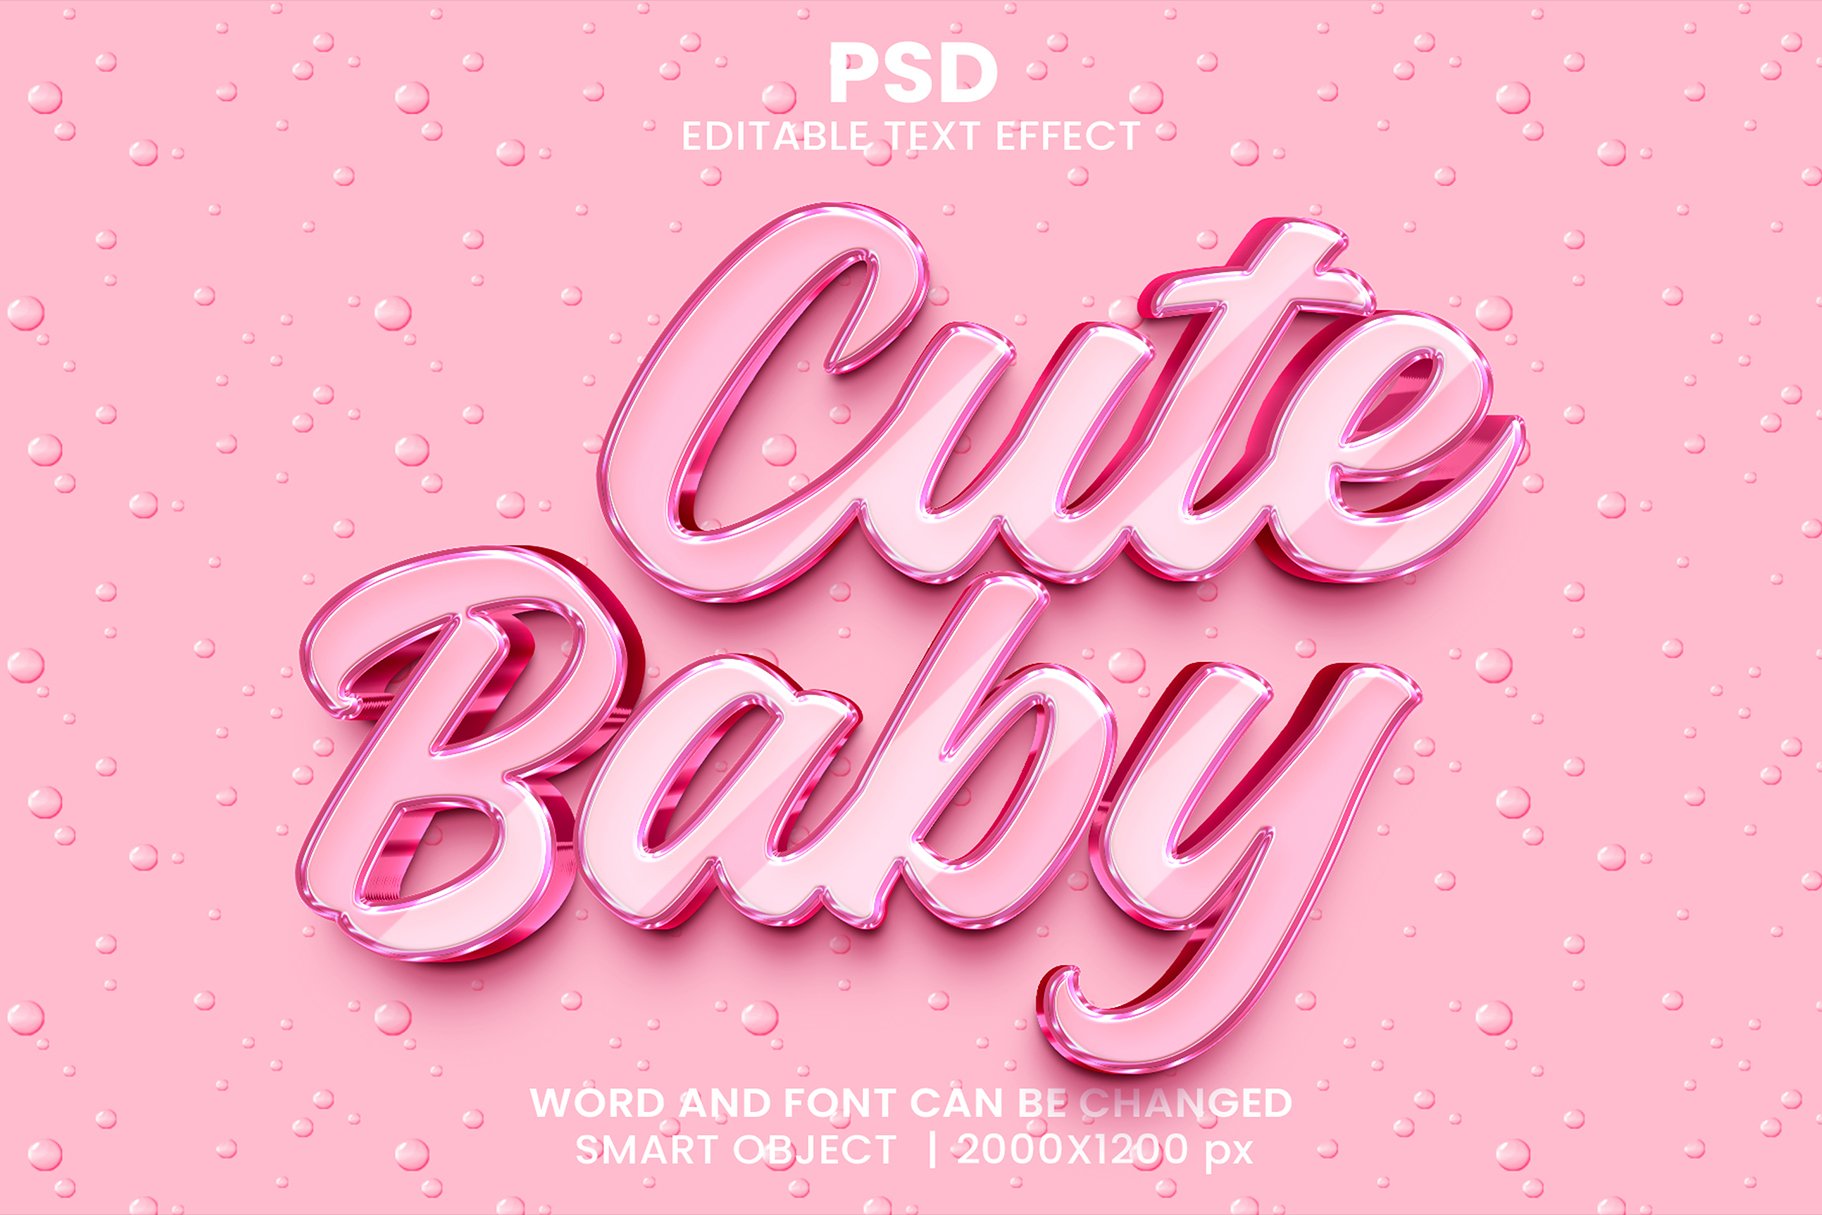 Cute Baby 3d Text Effect Stylecover image.